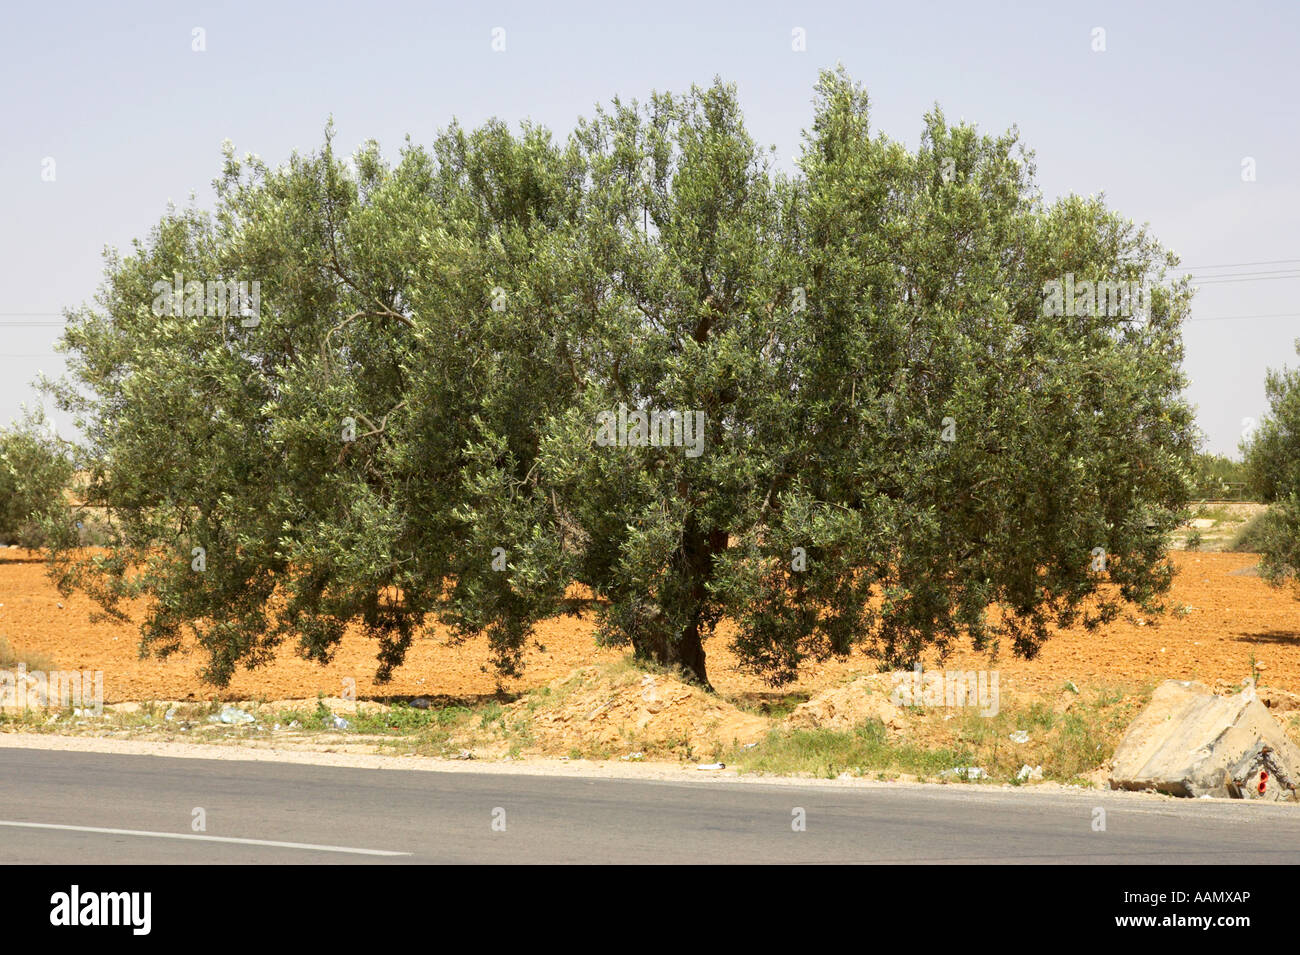 Olive Tree by the side of the road in Tunisia Stock Photo